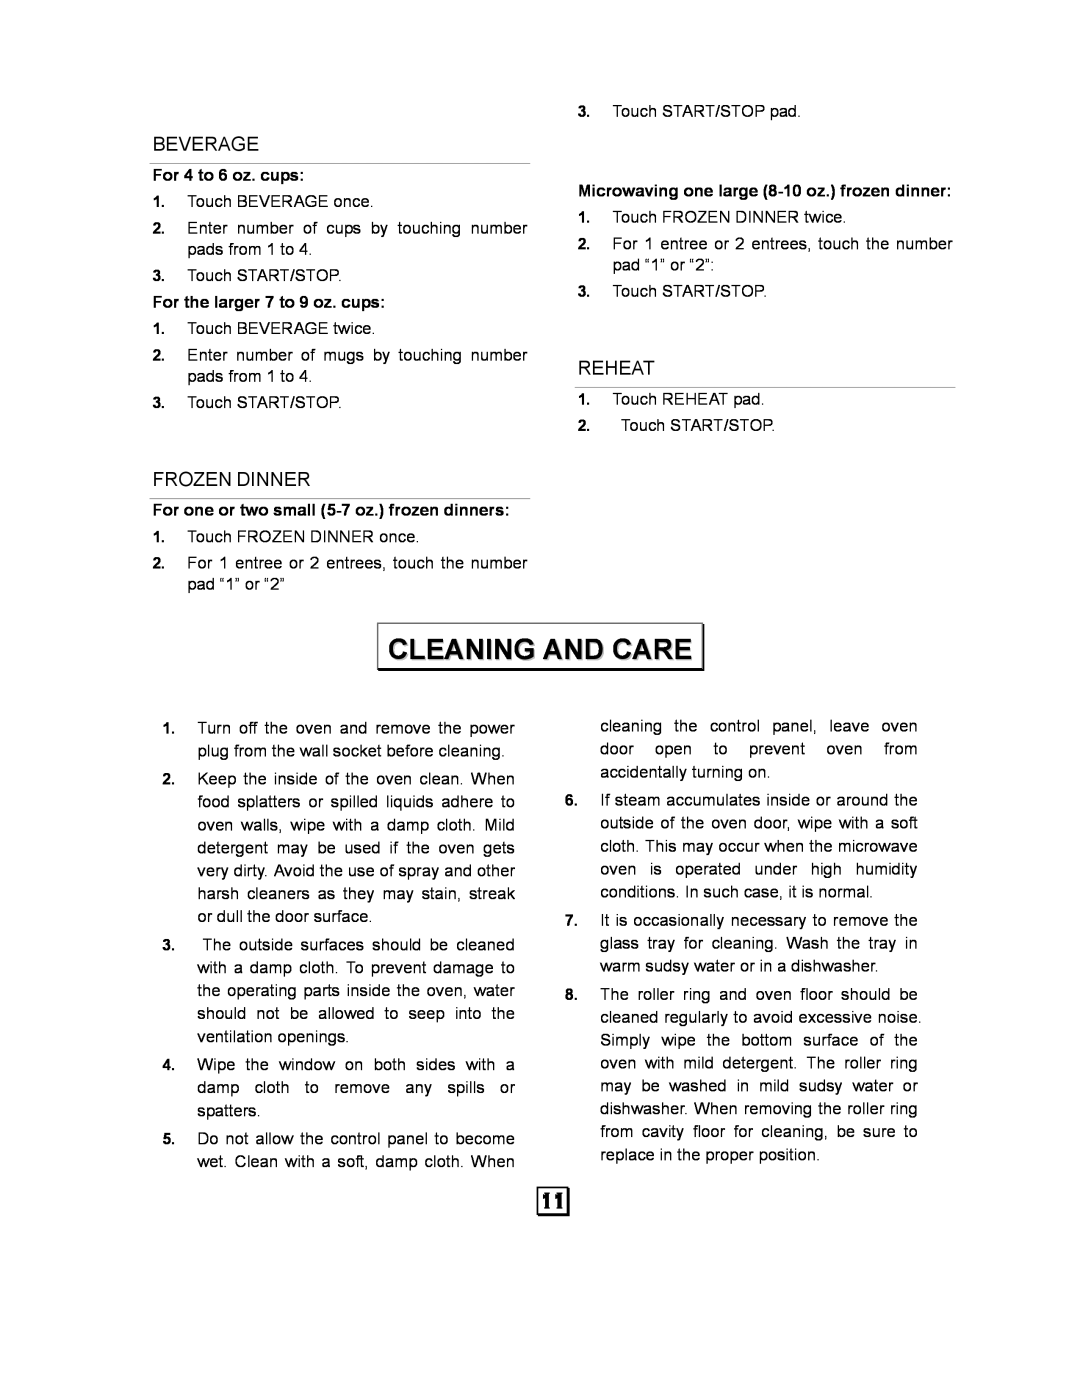 Kenmore 87043 owner manual Cleaning And Care, Beverage, Reheat, Frozen Dinner 